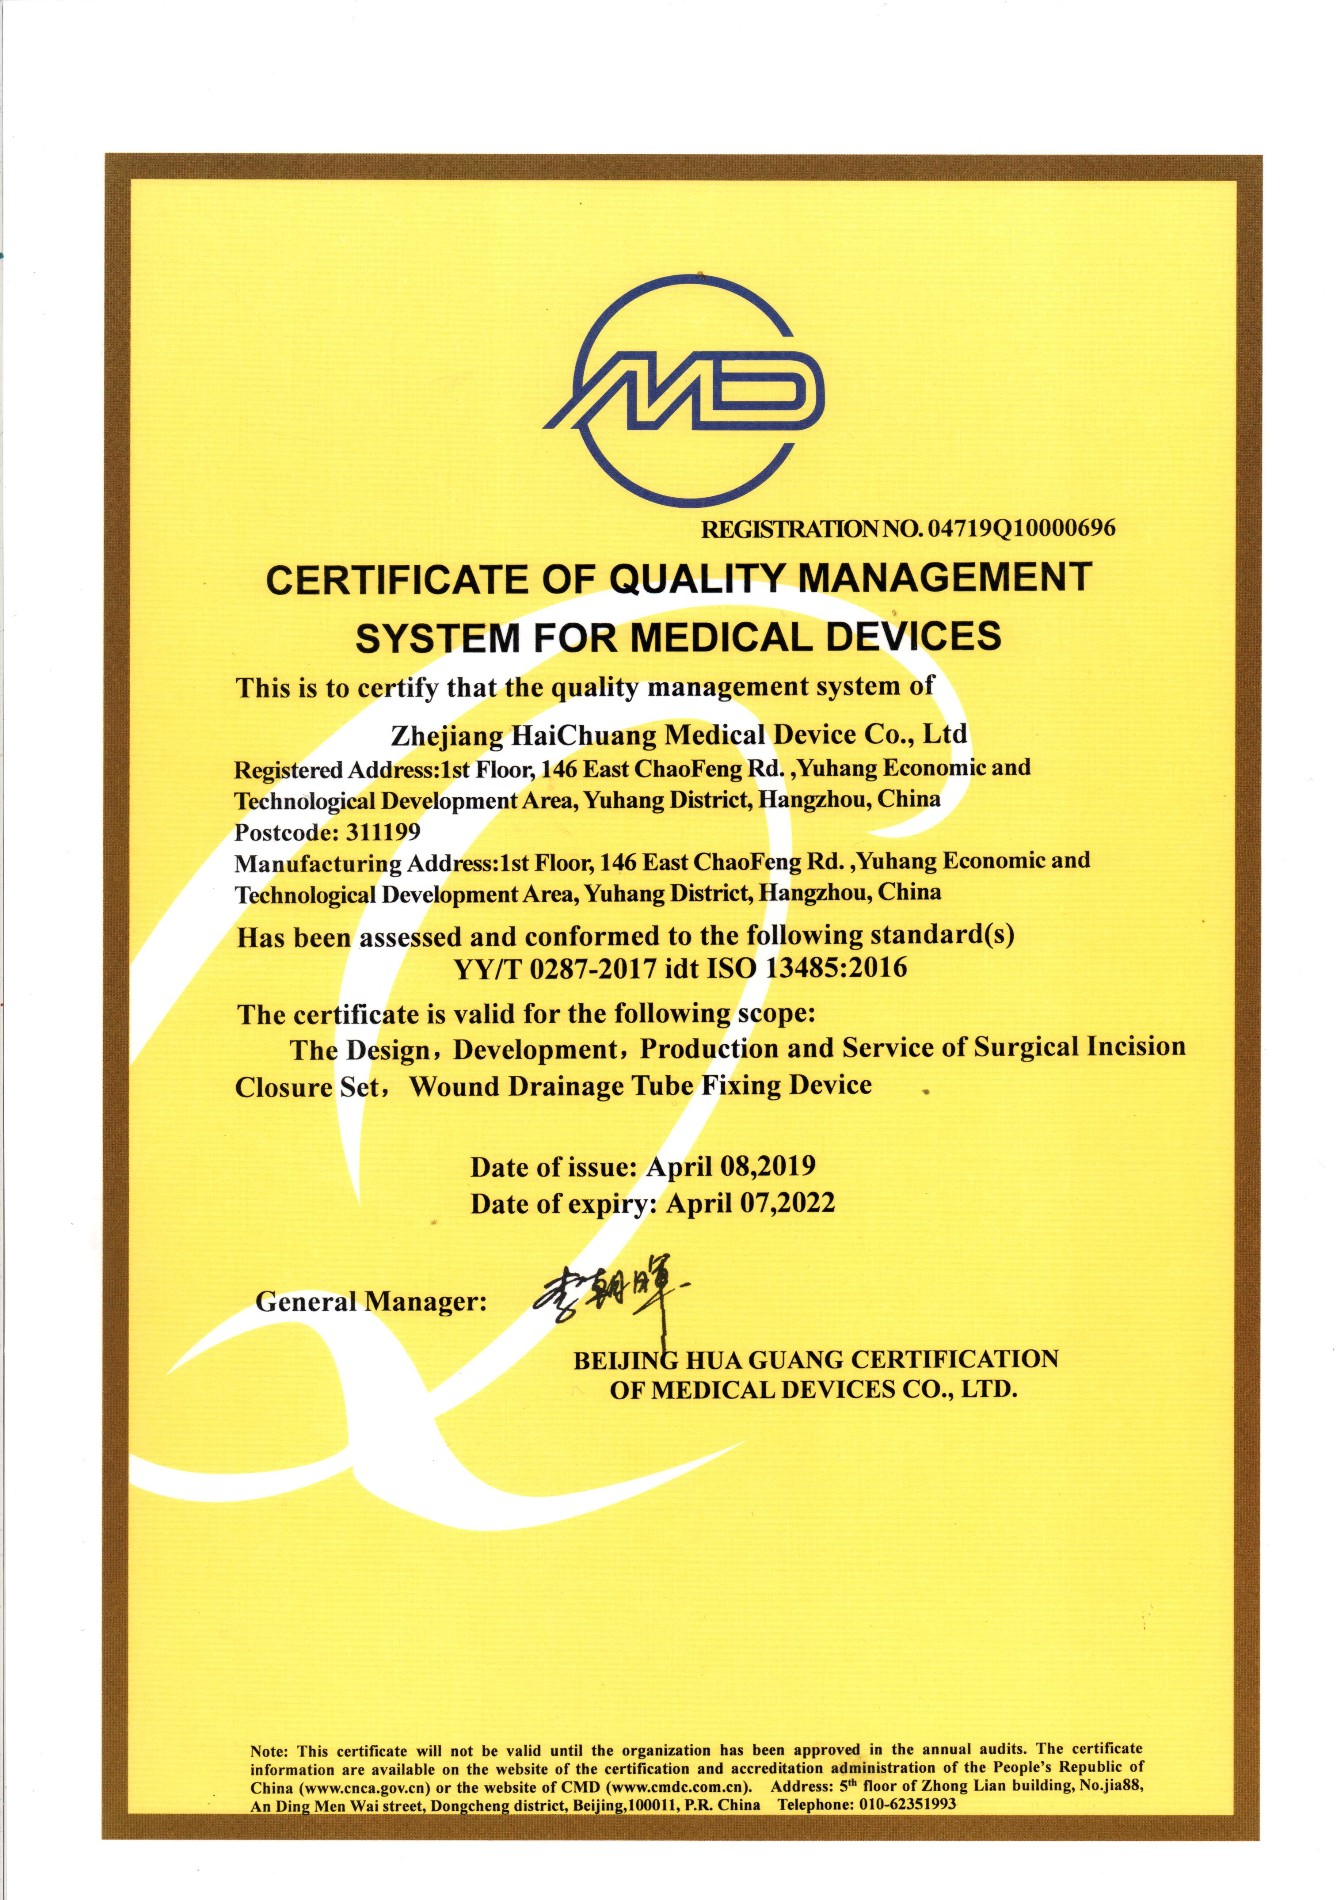 Certificate of Quality Management System for Medical Devices